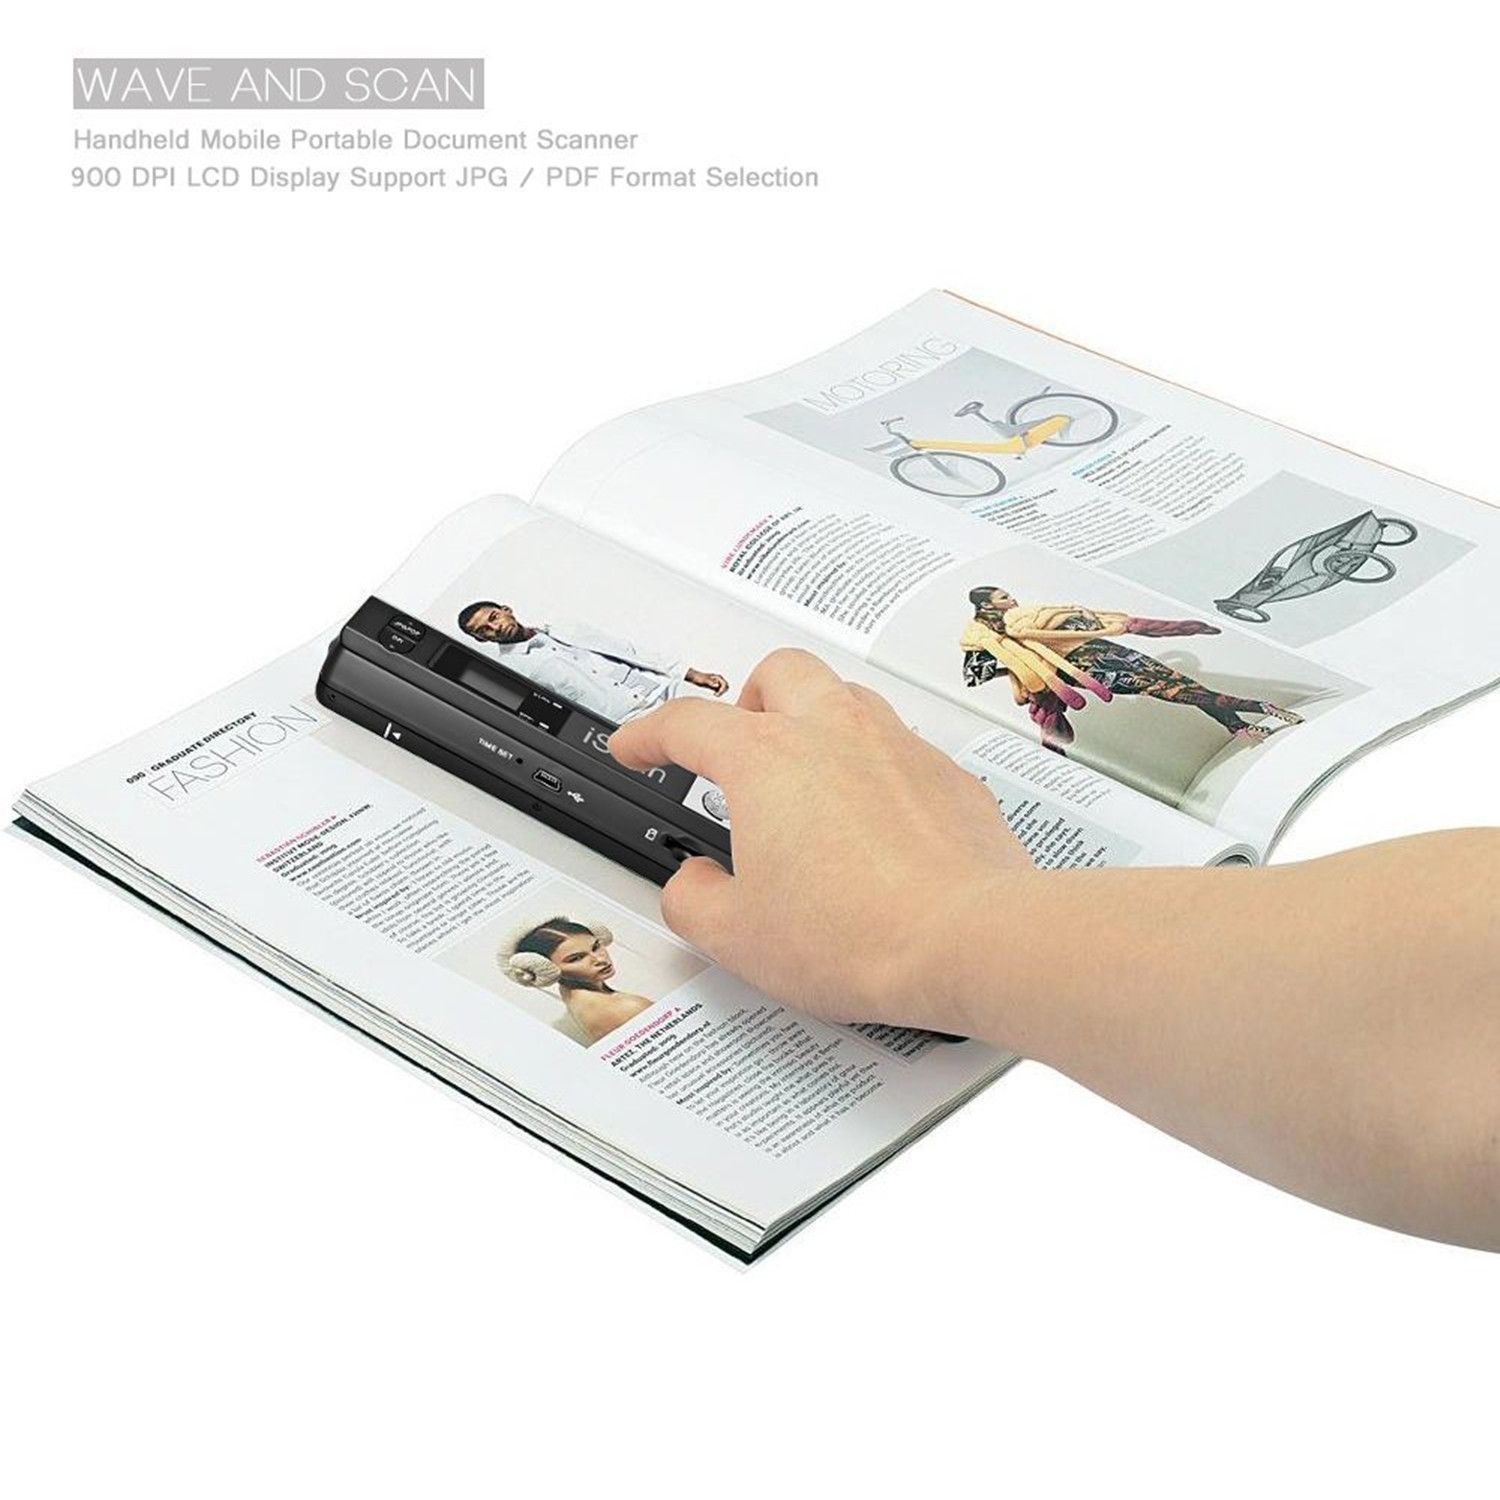 Portable Handheld Document Scanner A4 Size 900 DPI JPG PDF Formate LCD  Display For Business Reciepts Books Image2150 From Zhy0877, $39.25